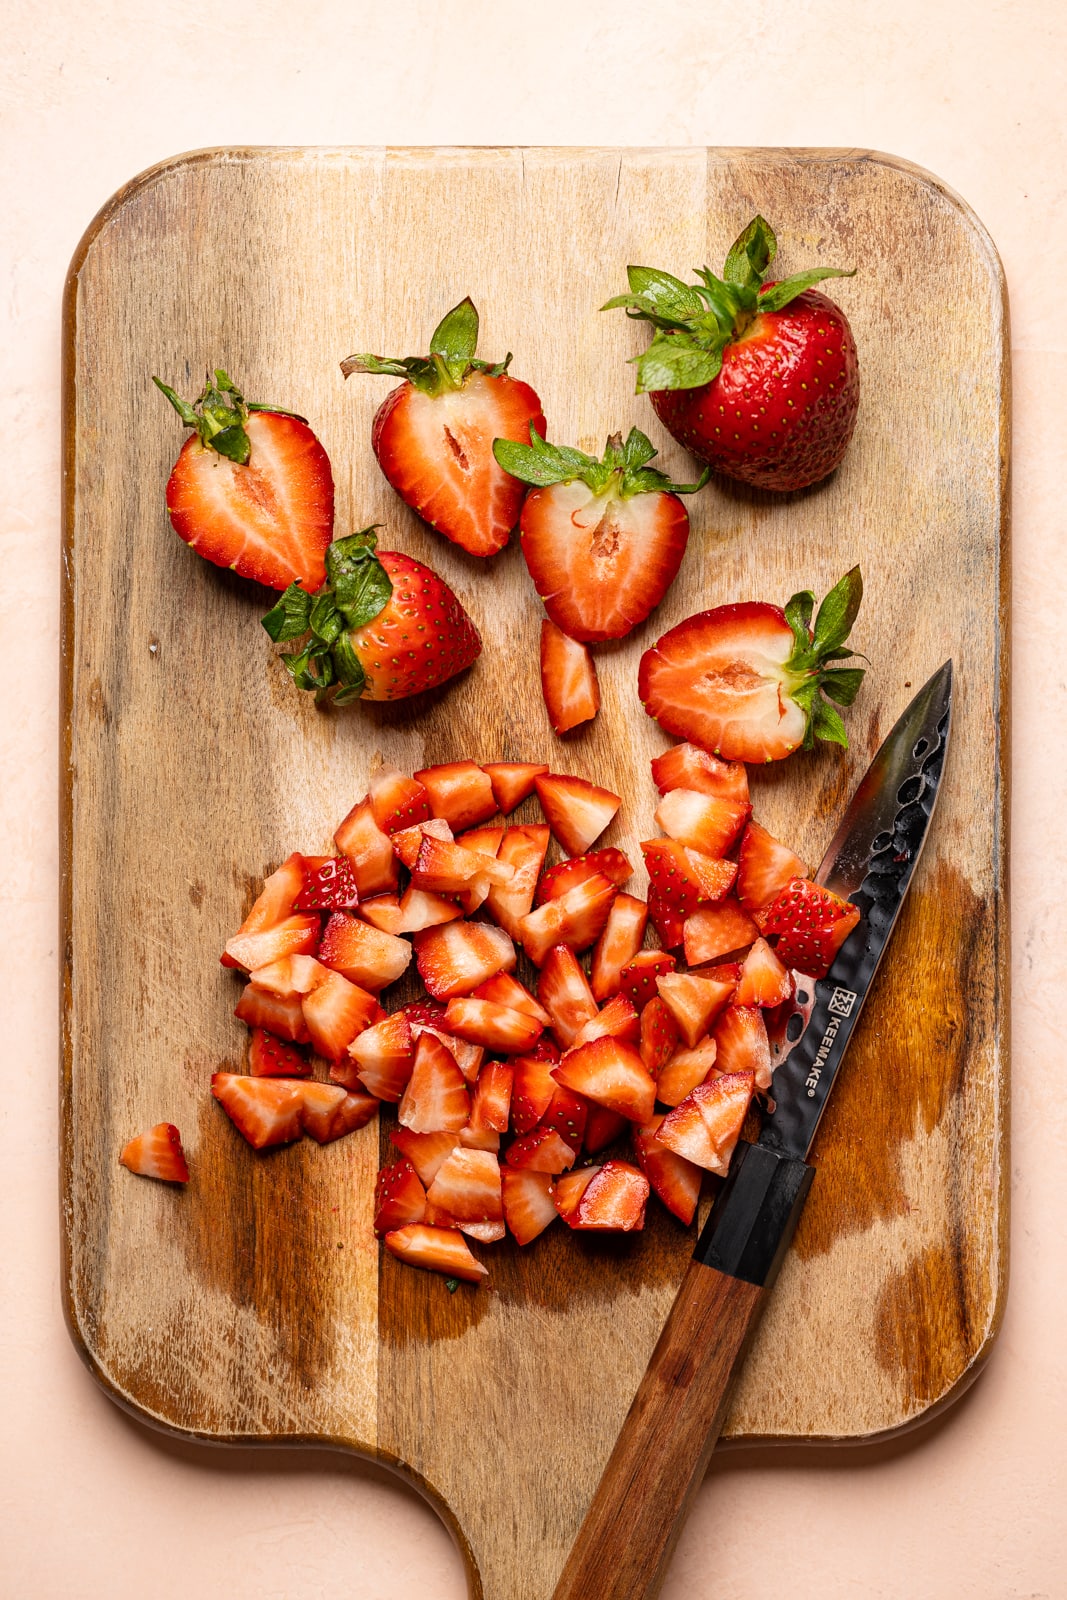 Diced and sliced strawberries on a wood cutting board with a knife on a peach table.